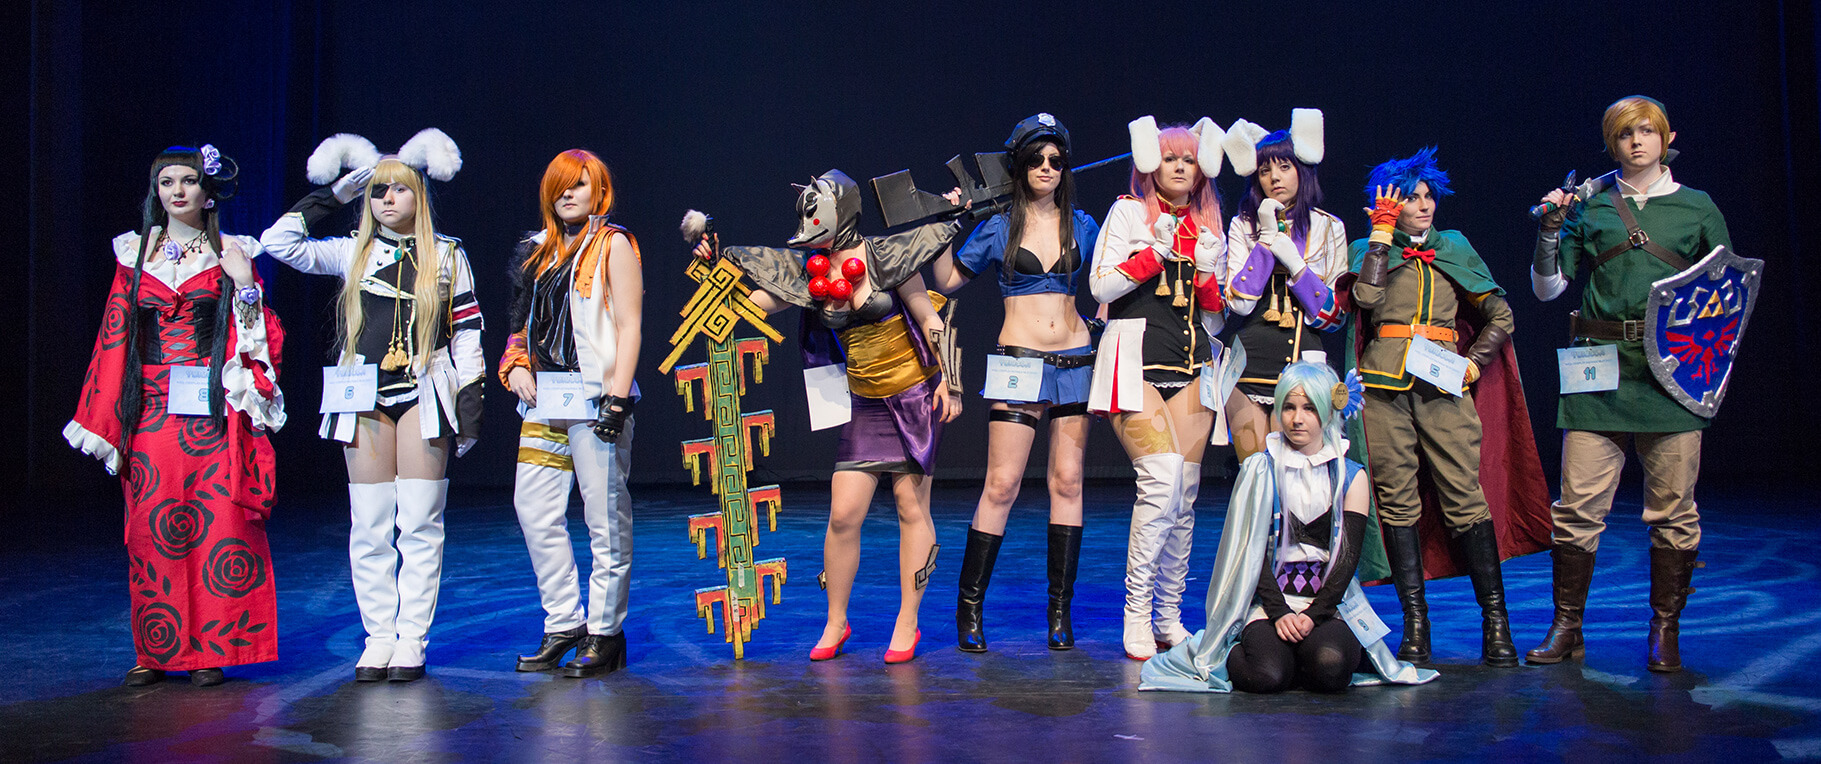 Top 10 Biggest Anime Conventions in the US: Your Ultimate Guide